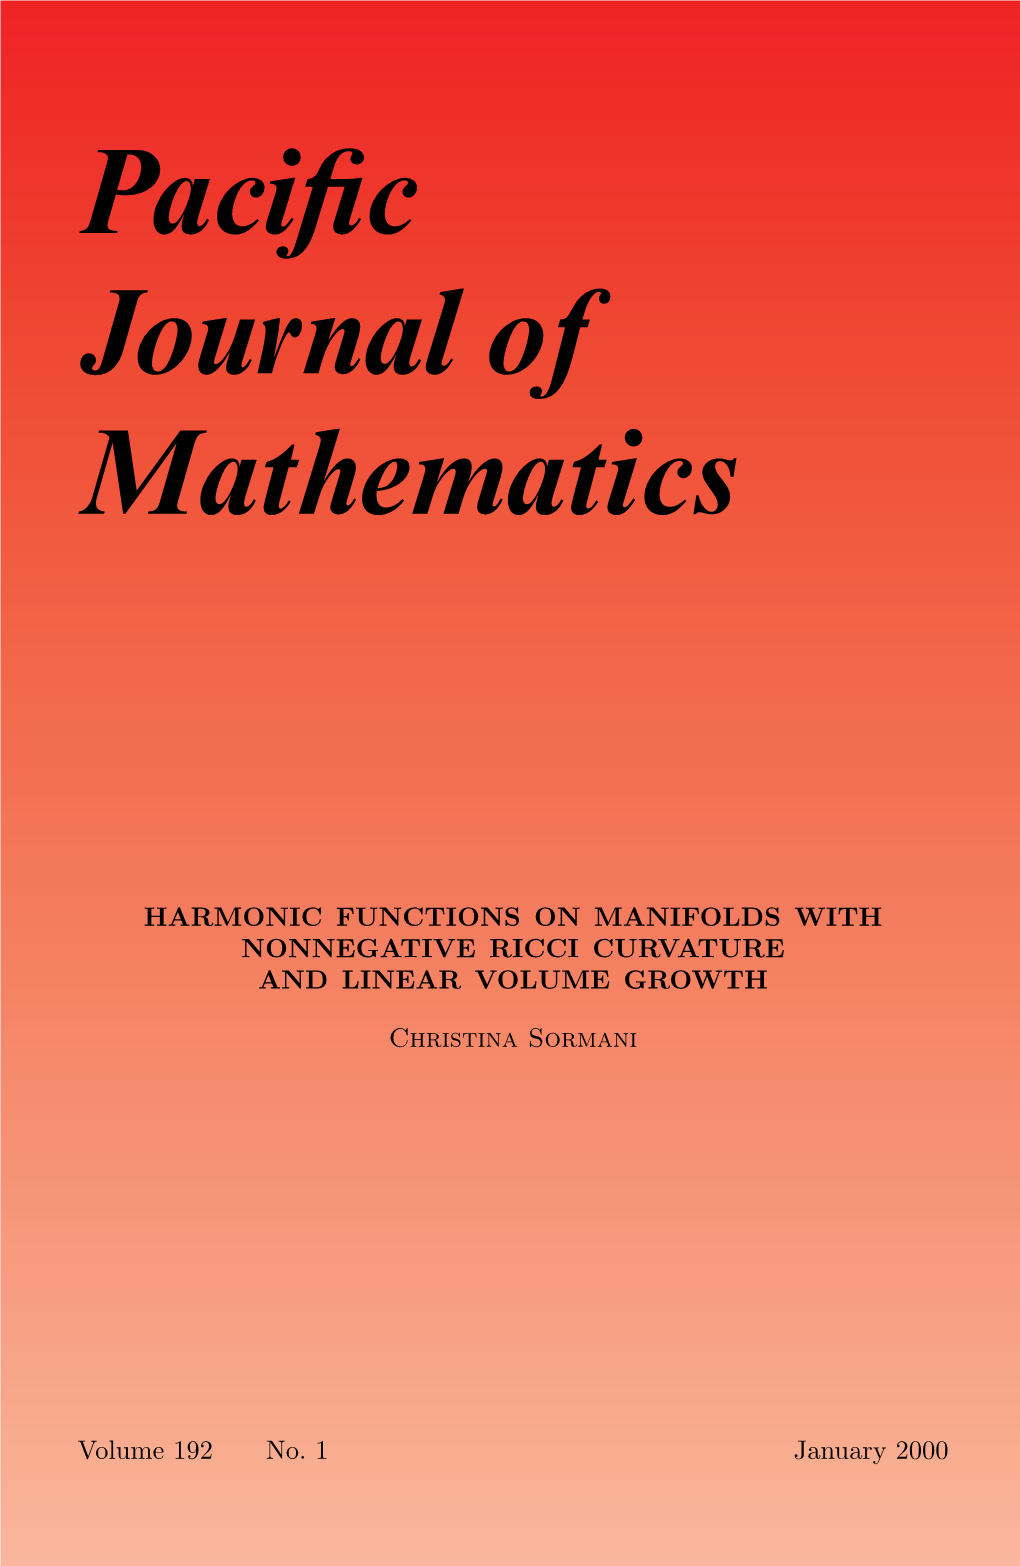 Harmonic Functions on Manifolds with Nonnegative Ricci Curvature and Linear Volume Growth